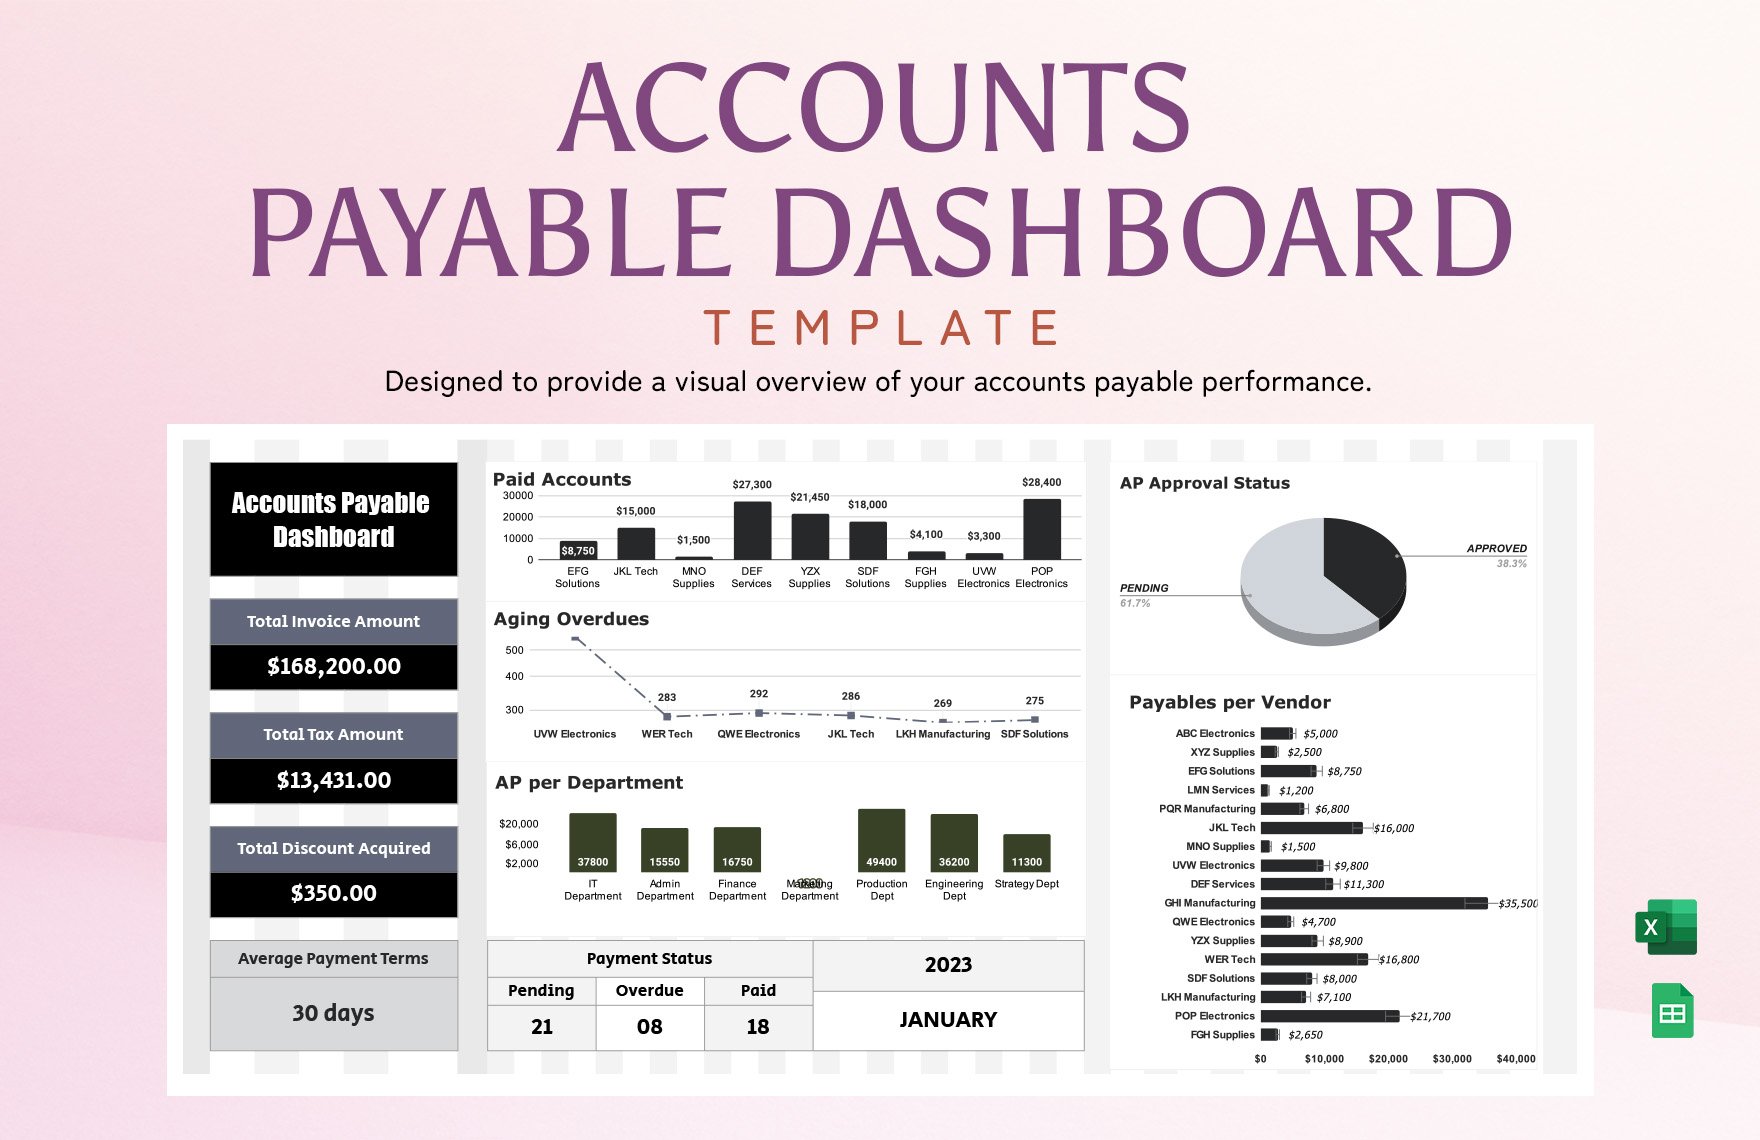 Accounts Payable Dashboard Template in Excel, Google Sheets